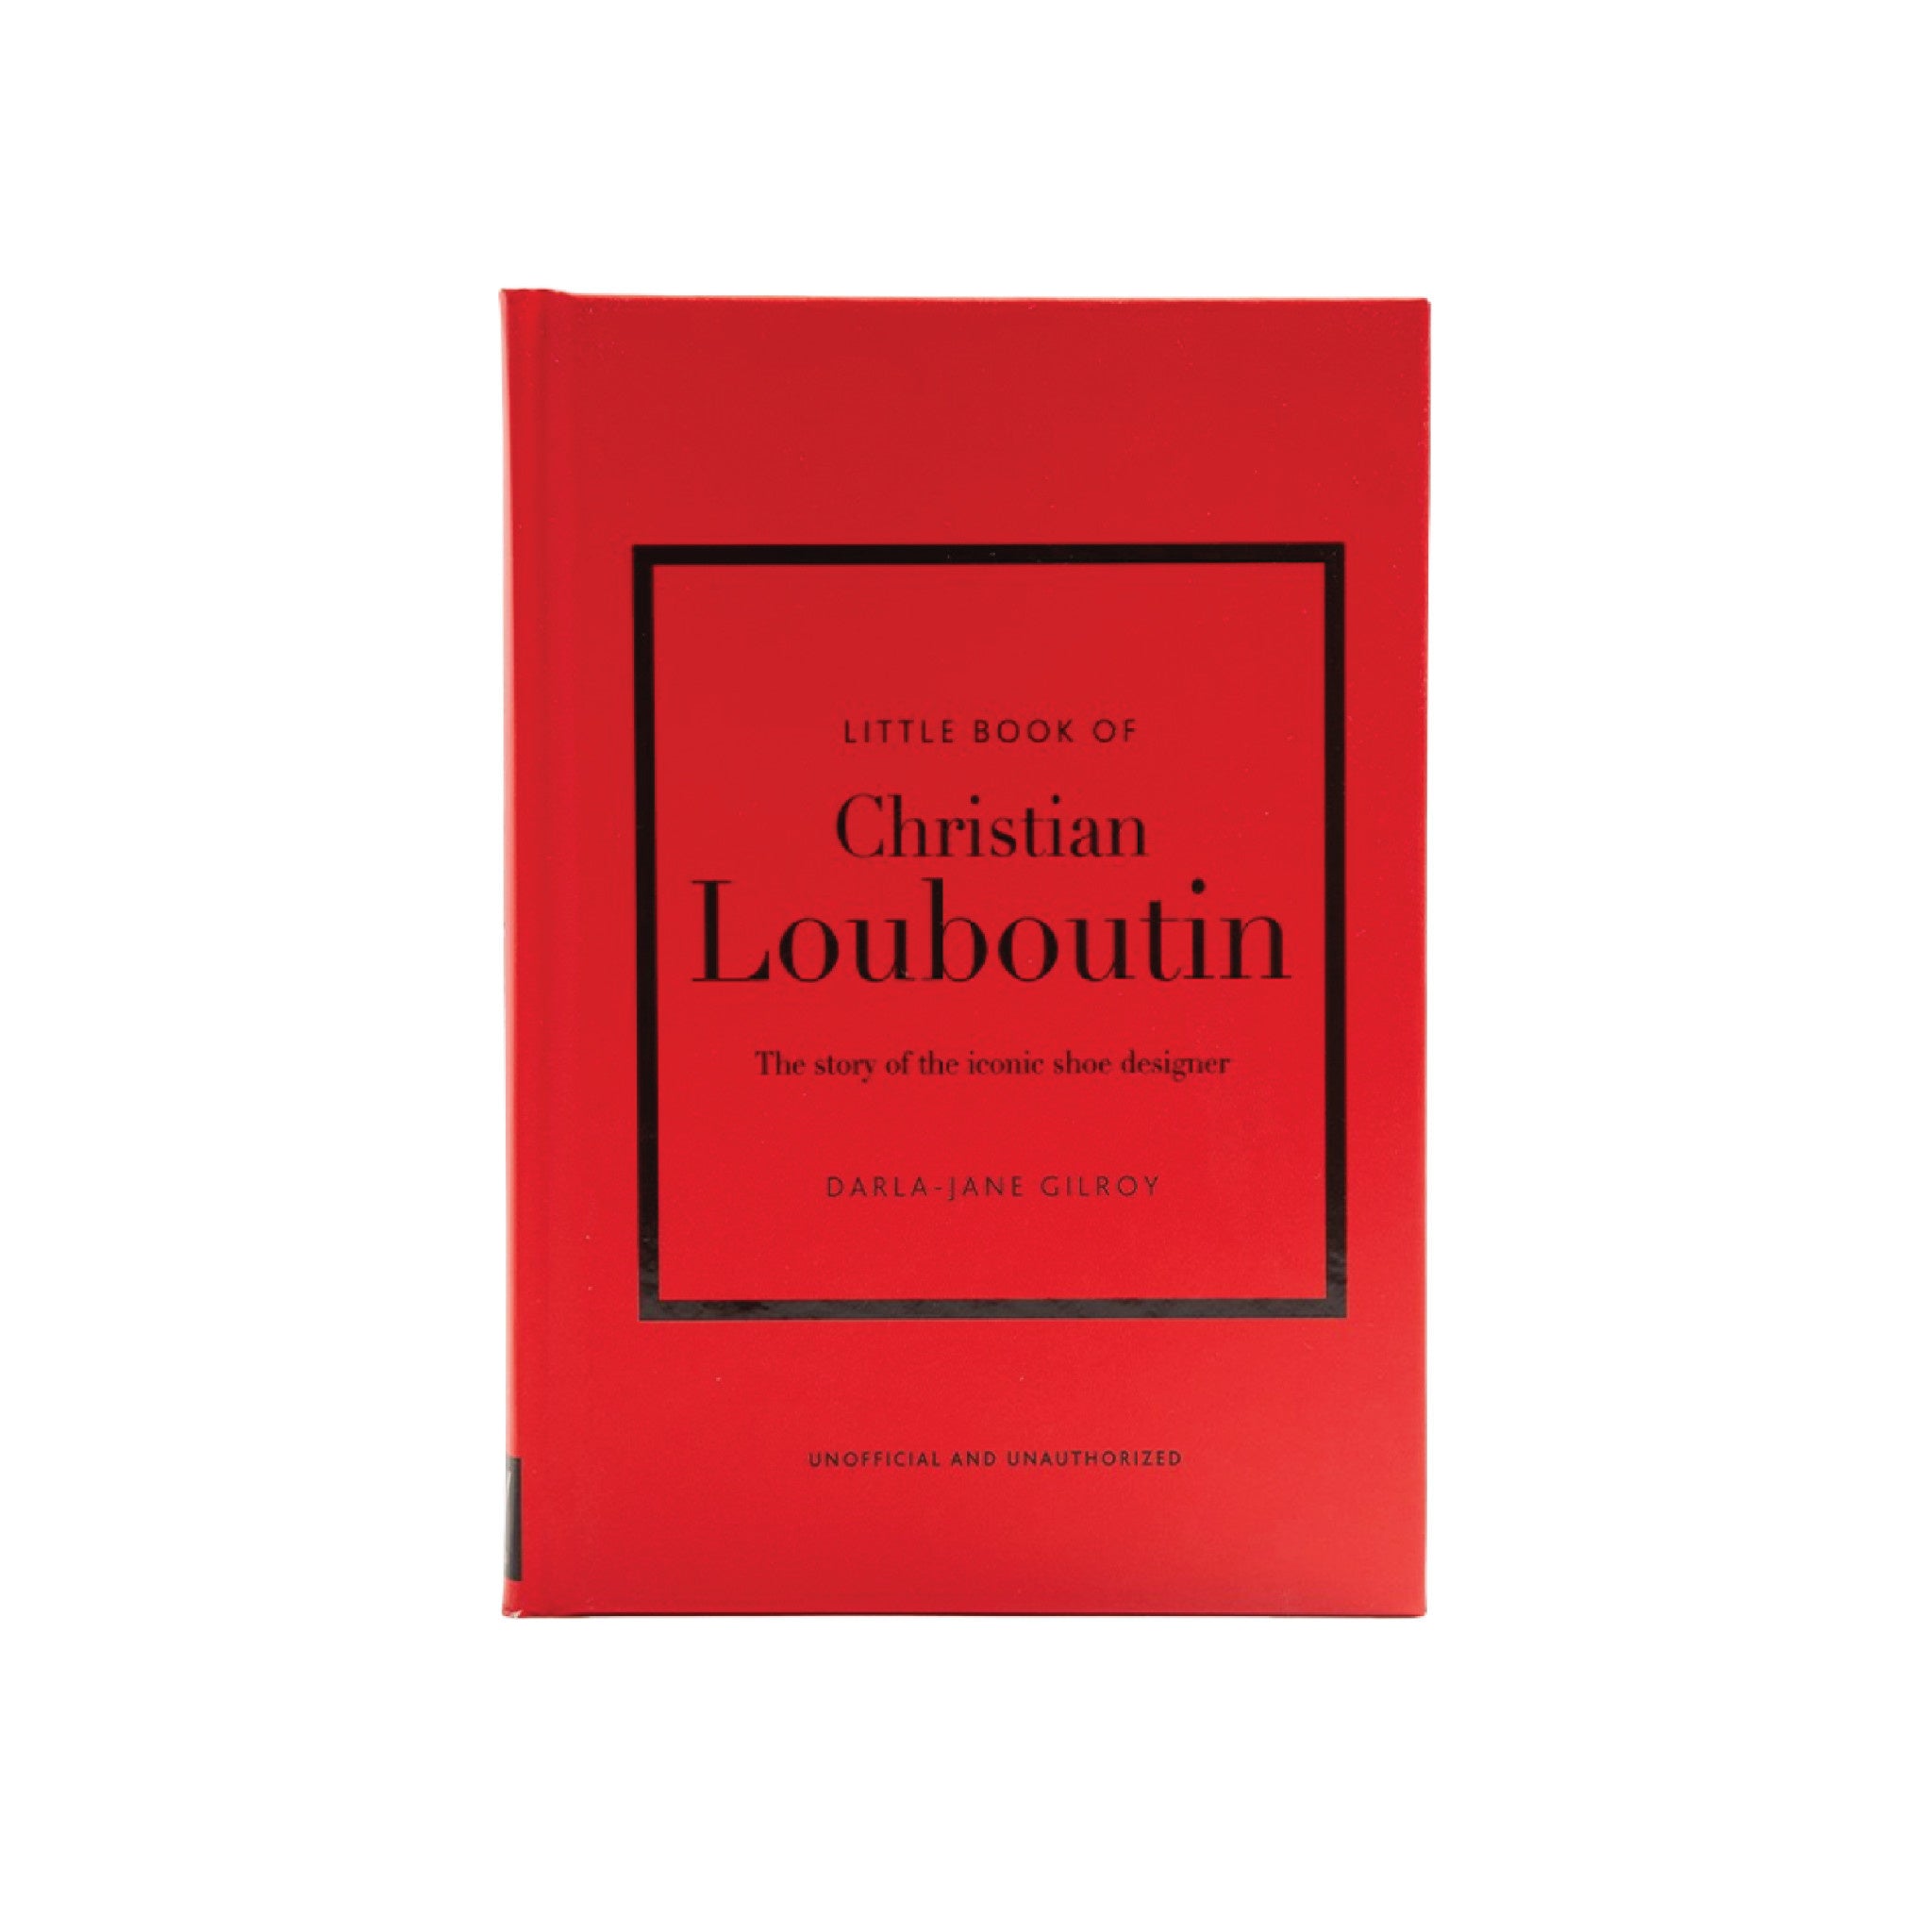 Little Book of Christian Louboutin: The Story of the Iconic Shoe Designer - Wynwood Walls Shop